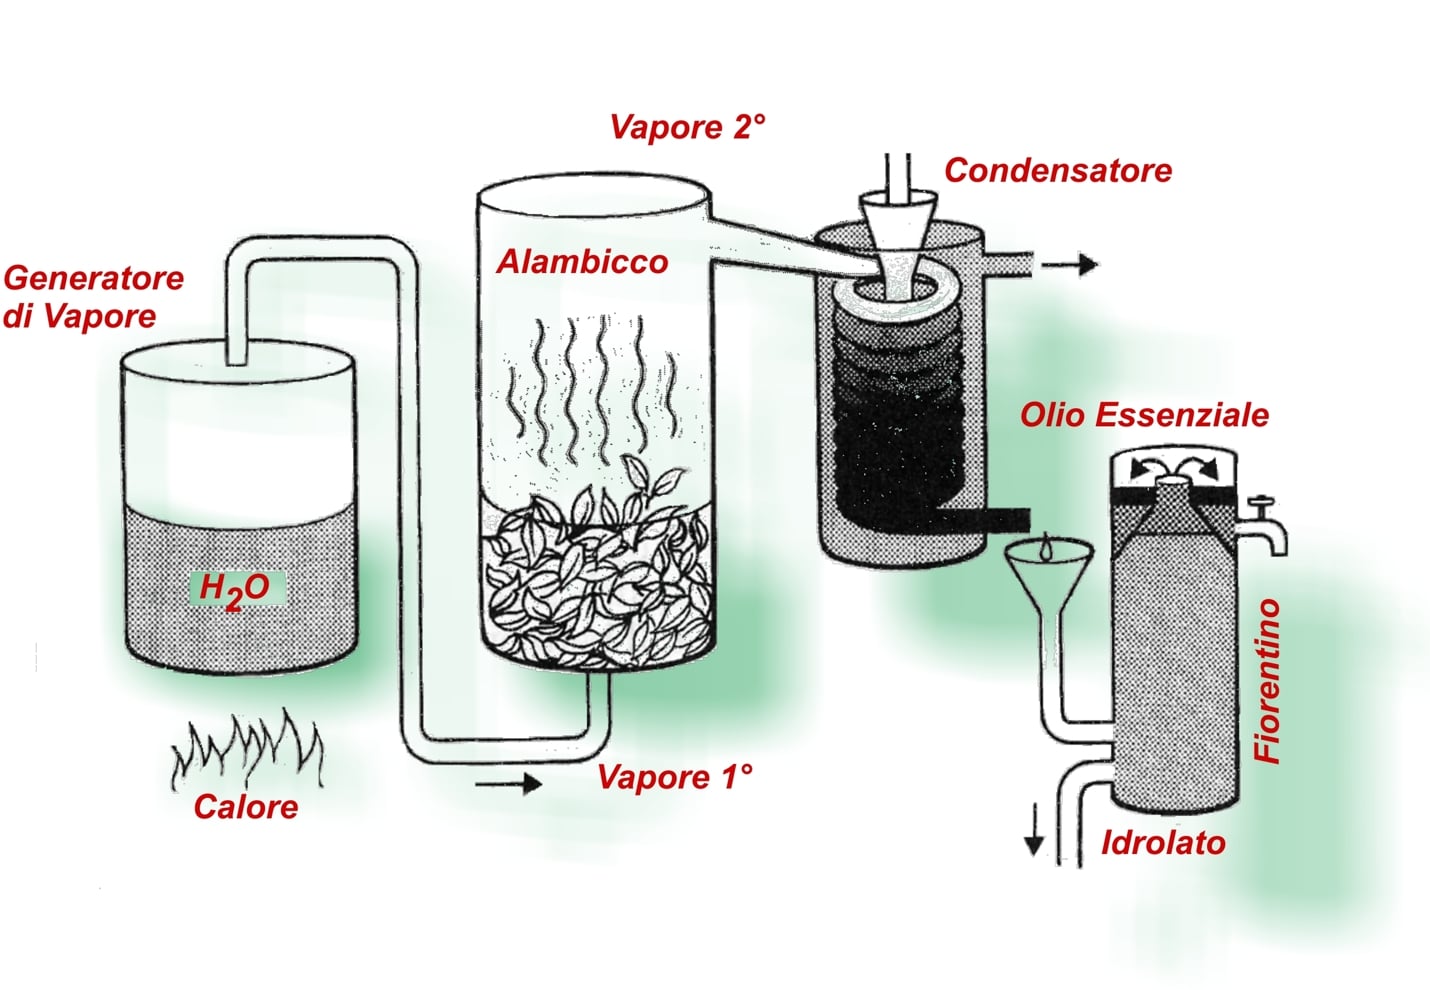 Scheme of the production of essential oils and Hyper Hydro: on the left a steam generator, in the center the extraction alembic and the vapor condenser, on the right the Florentine separation vase, green shadows and red writing